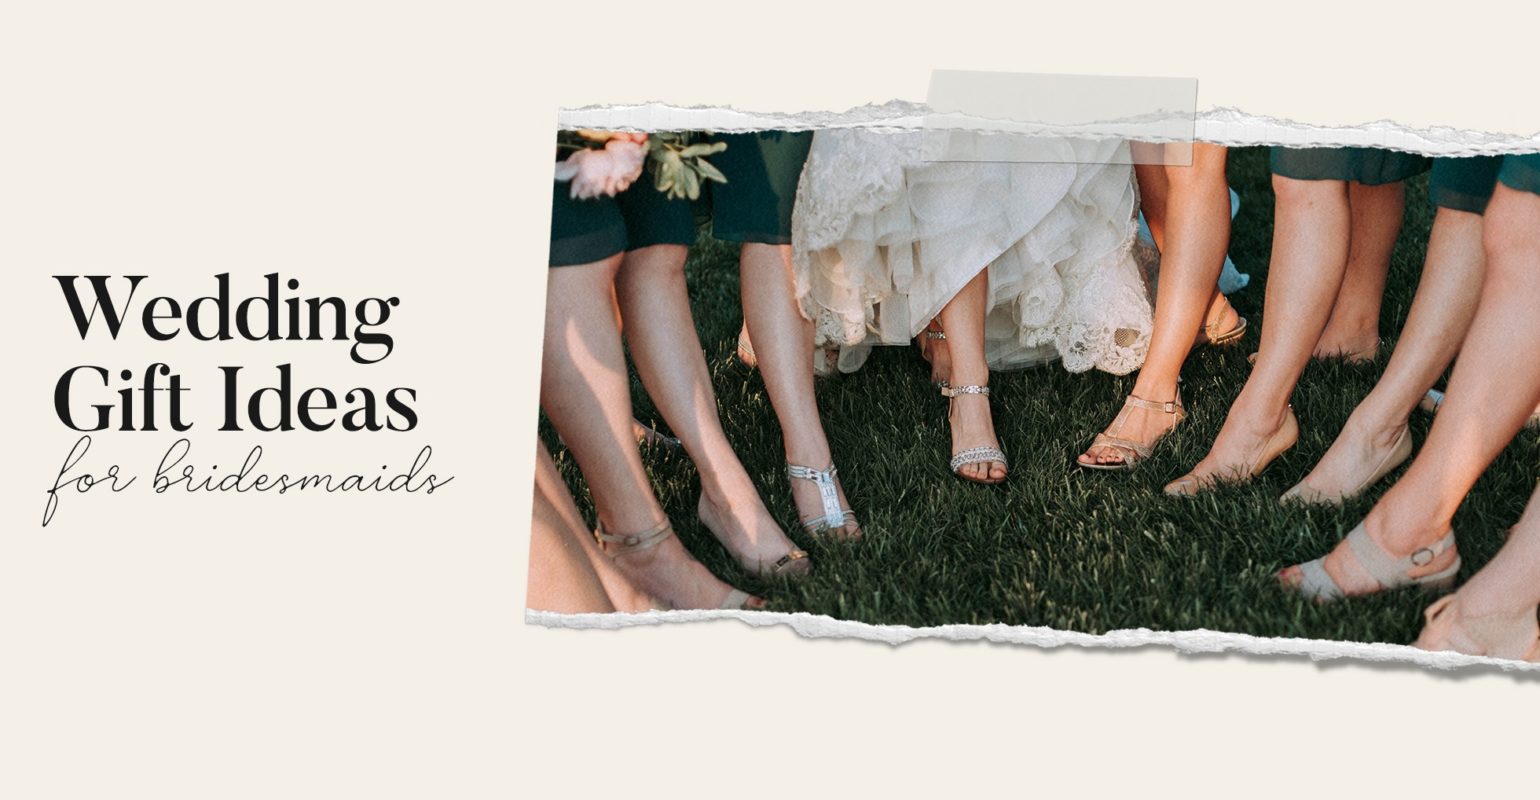 Best Wedding Gifts for Bridesmaids